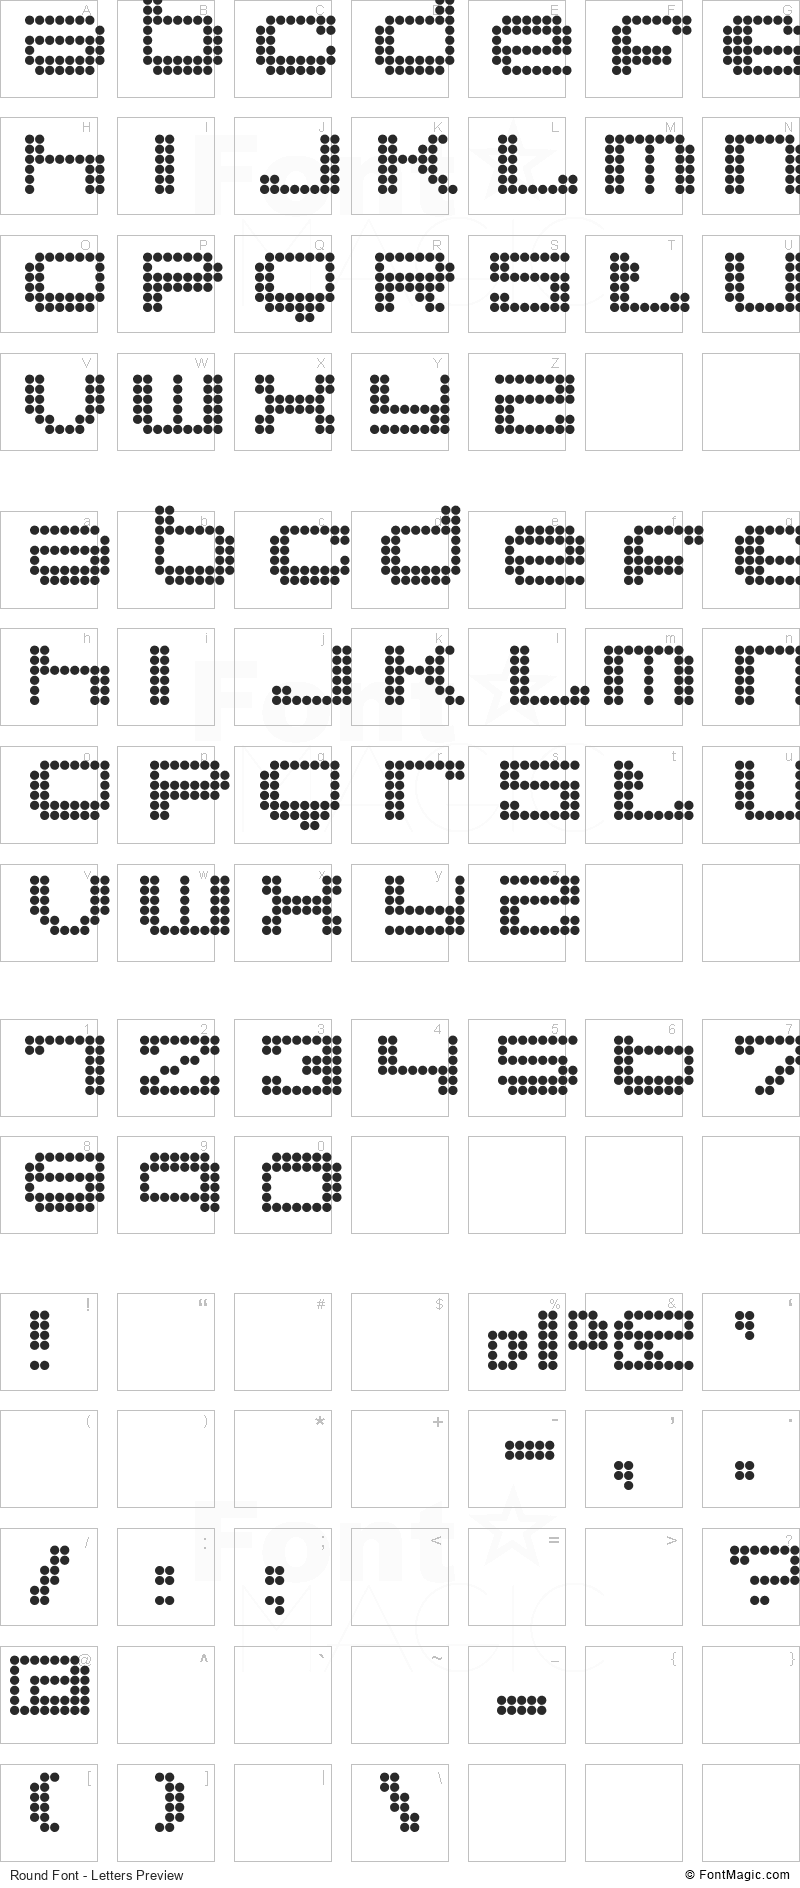 Round Font - All Latters Preview Chart